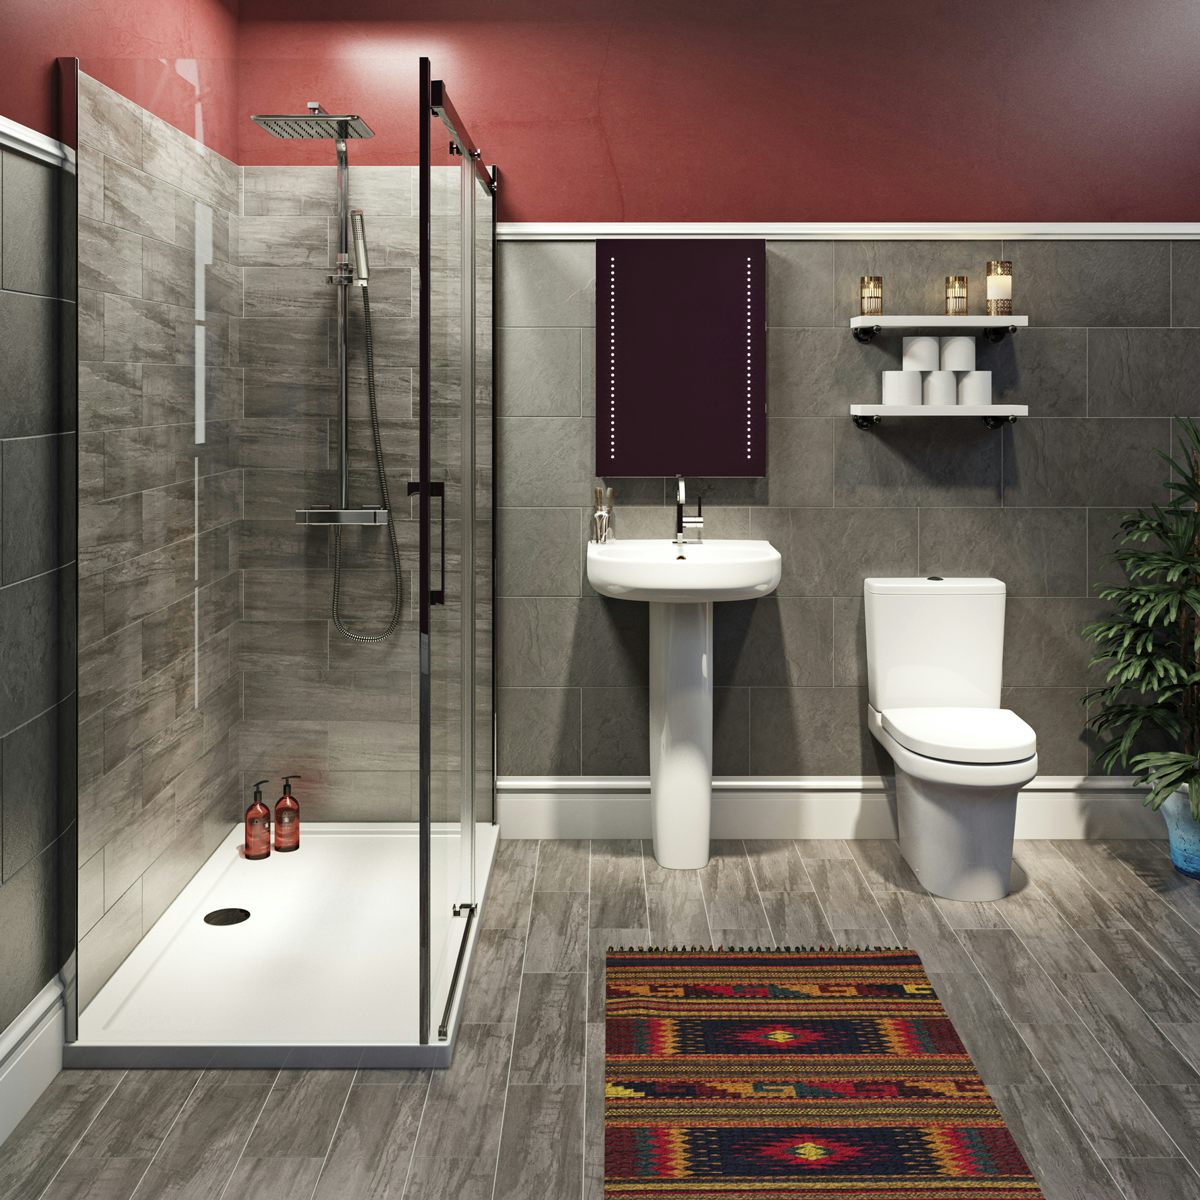 Mode Burton complete bathroom suite with enclosure, tray, shower and taps 1200 x 900